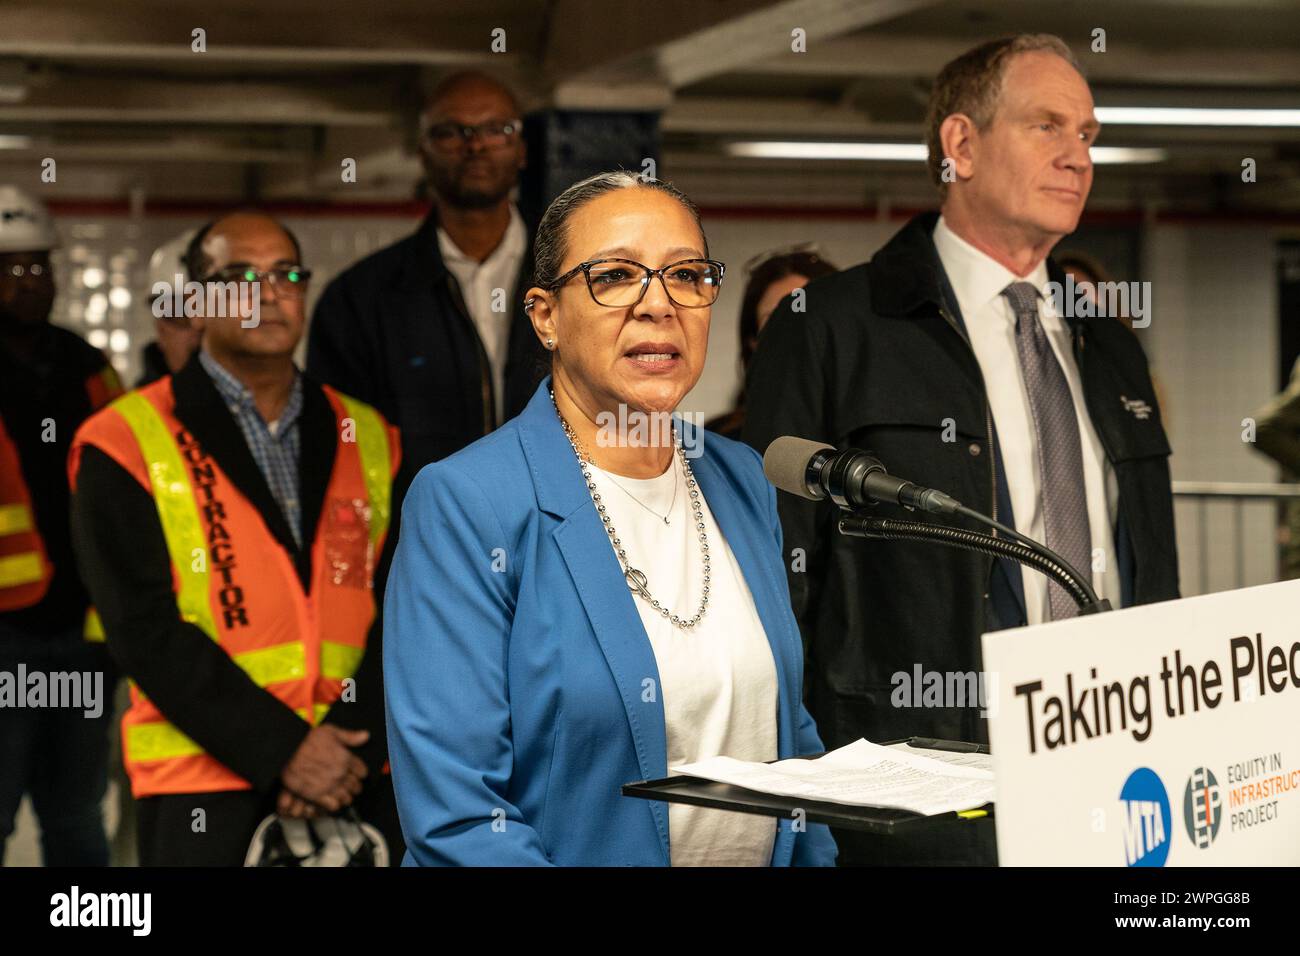 Lourdes Zapata, MTA Chief Diversity & Inclusion Officer speaks during MTA announcement at 14th street subway station in New York on March 7, 2024. Dorval Carter Jr., Chicago Transit Authority President and Equity in Infrastructure Project Co-Chair, John Porcari, Equity in Infrastructure Project Co-Founder and Former U.S. Deputy Secretary of Transportation, Phillip Washington, Denver International Airport CEO and Equity in Infrastructure Project Chair, Janno Lieber, MTA Chair and CEO signed a pledge to promote minorities and women owned business to receive contracts to work on infrastructure pr Stock Photo